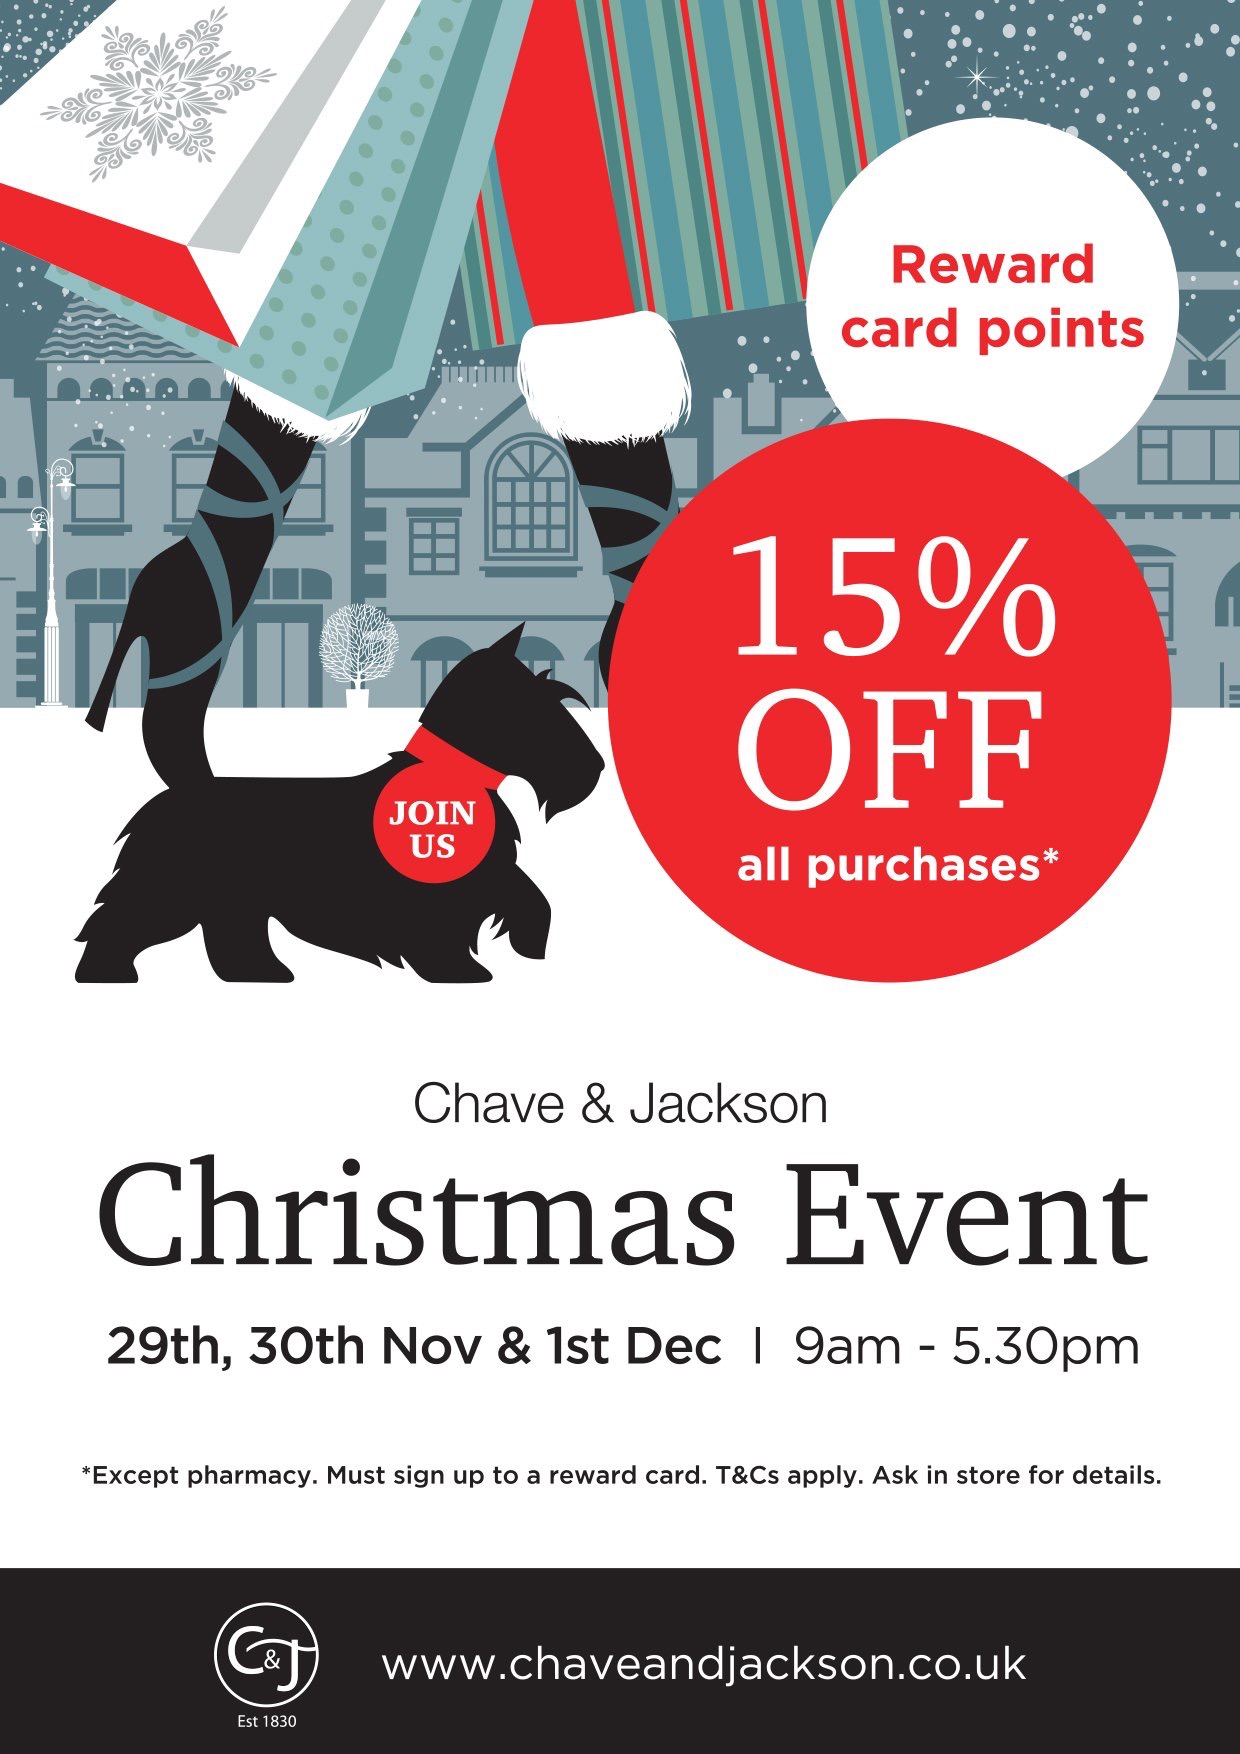 Chave & Jackson Christmas Event – 15% off purchases